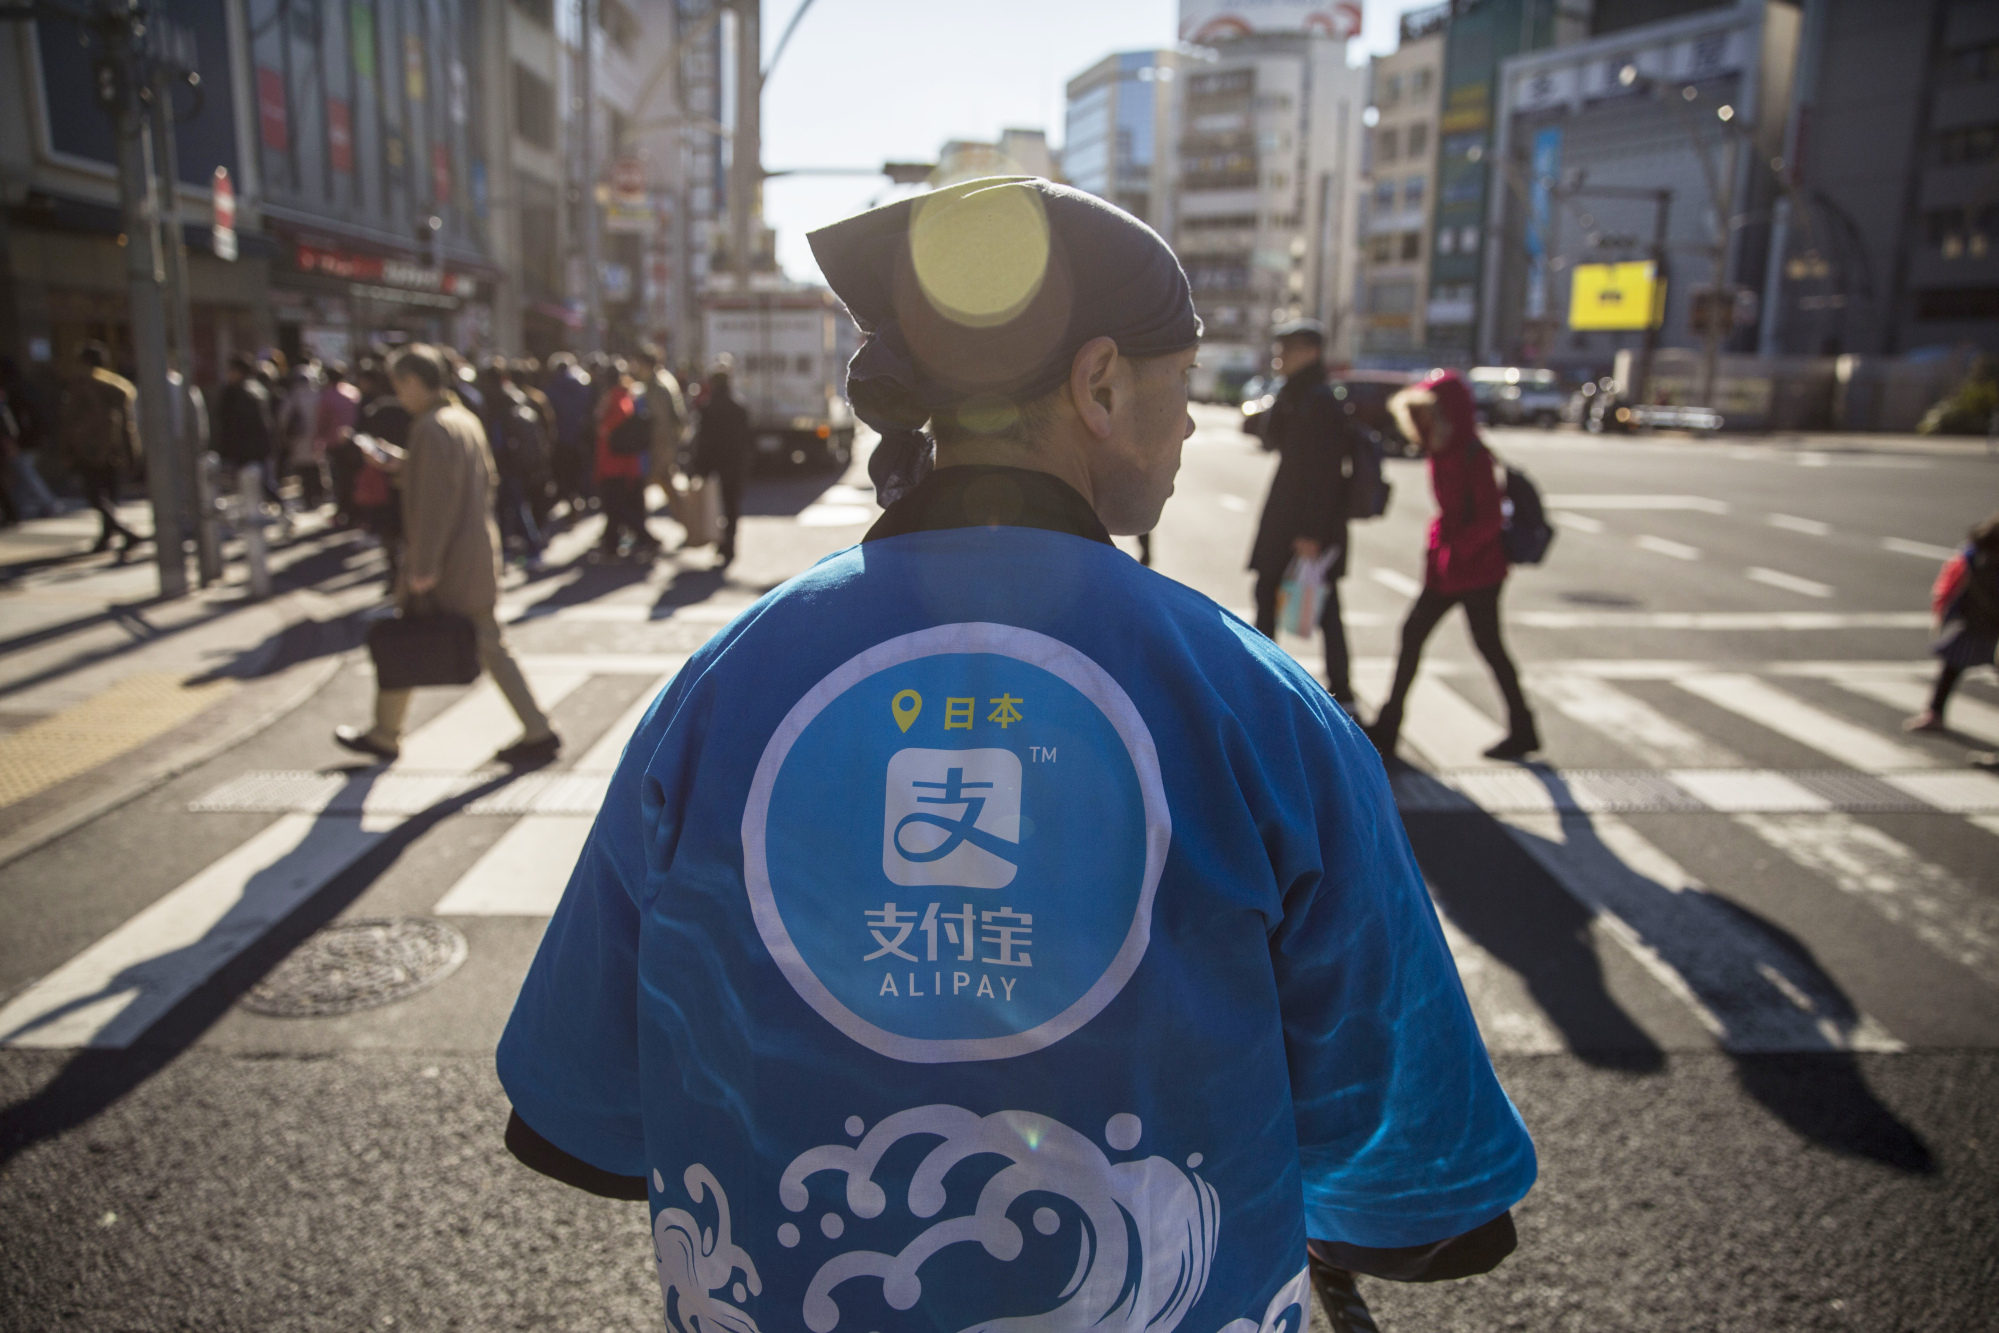 A staff member wearing a uniform featuring the logo for Ant Financial Services Group's Alipay.